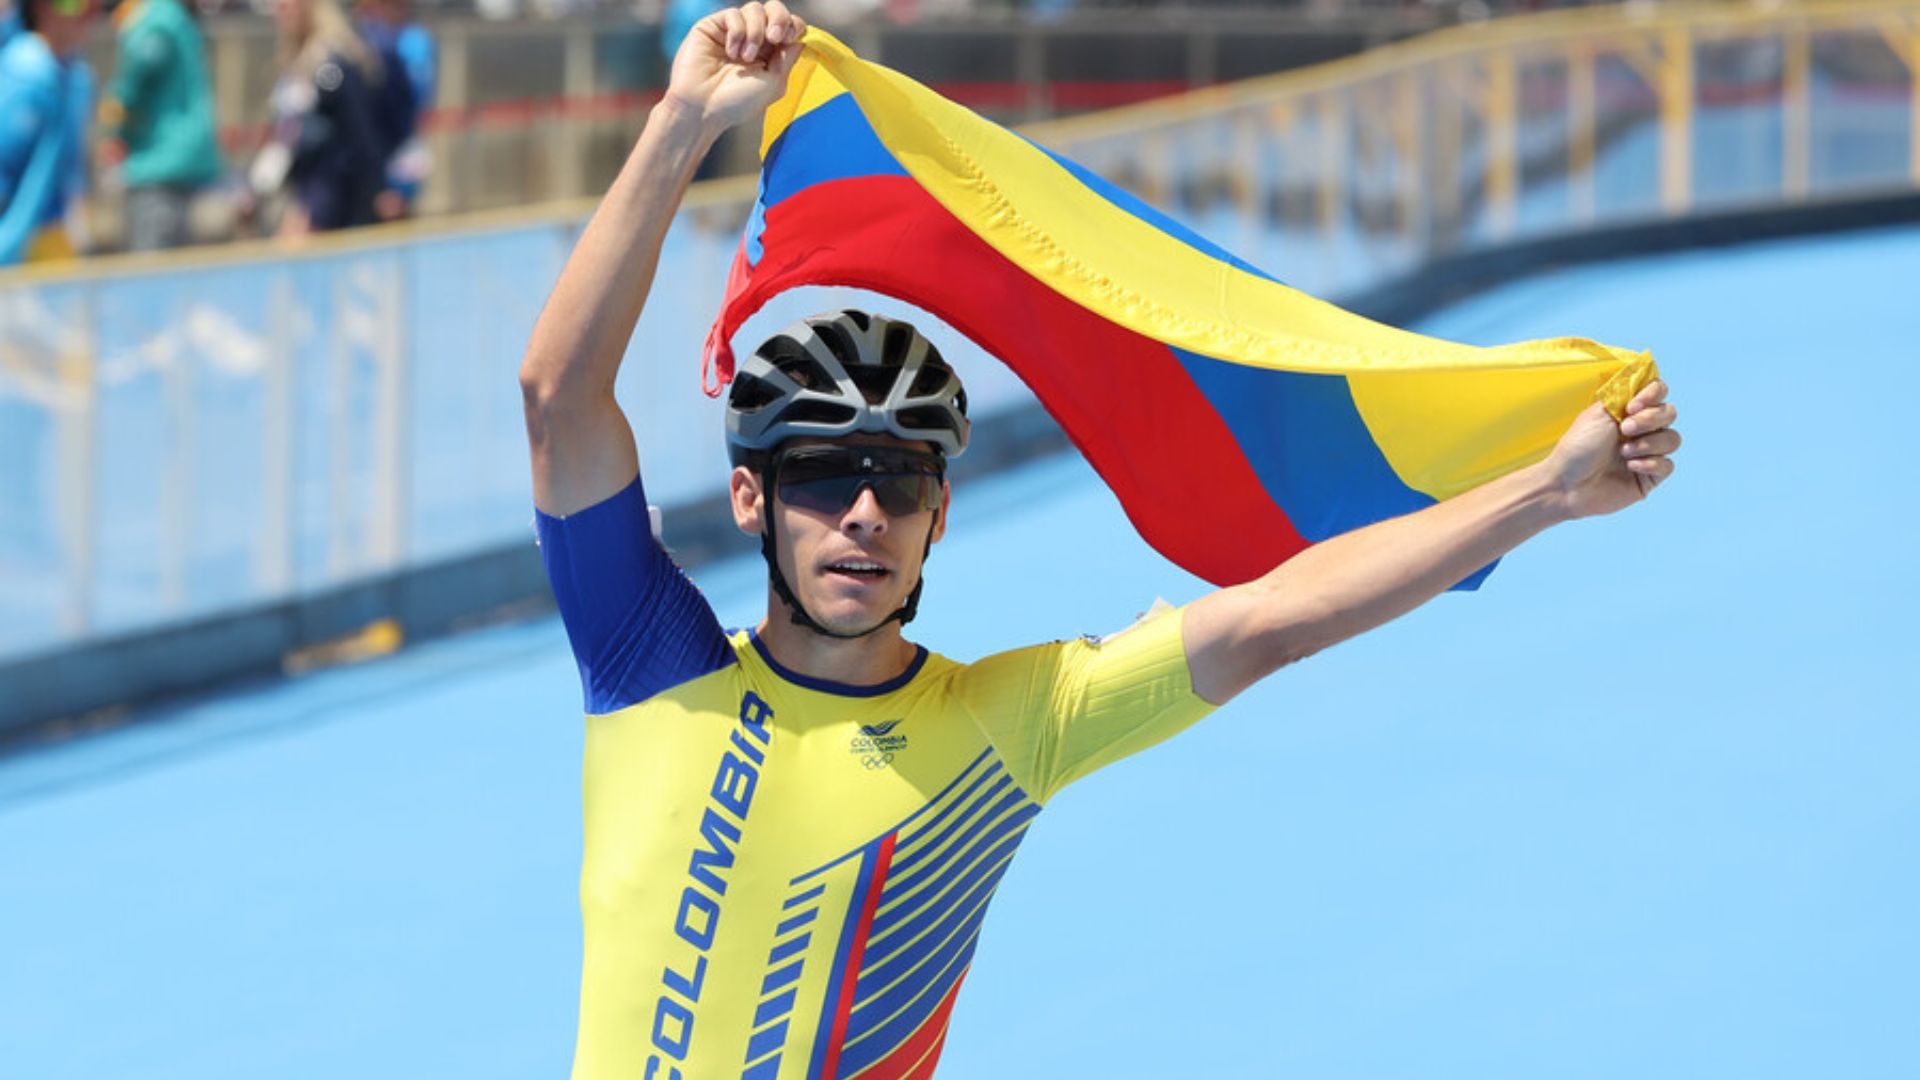 Speed Skating: Colombia Takes Gold in Male's 500 Meters